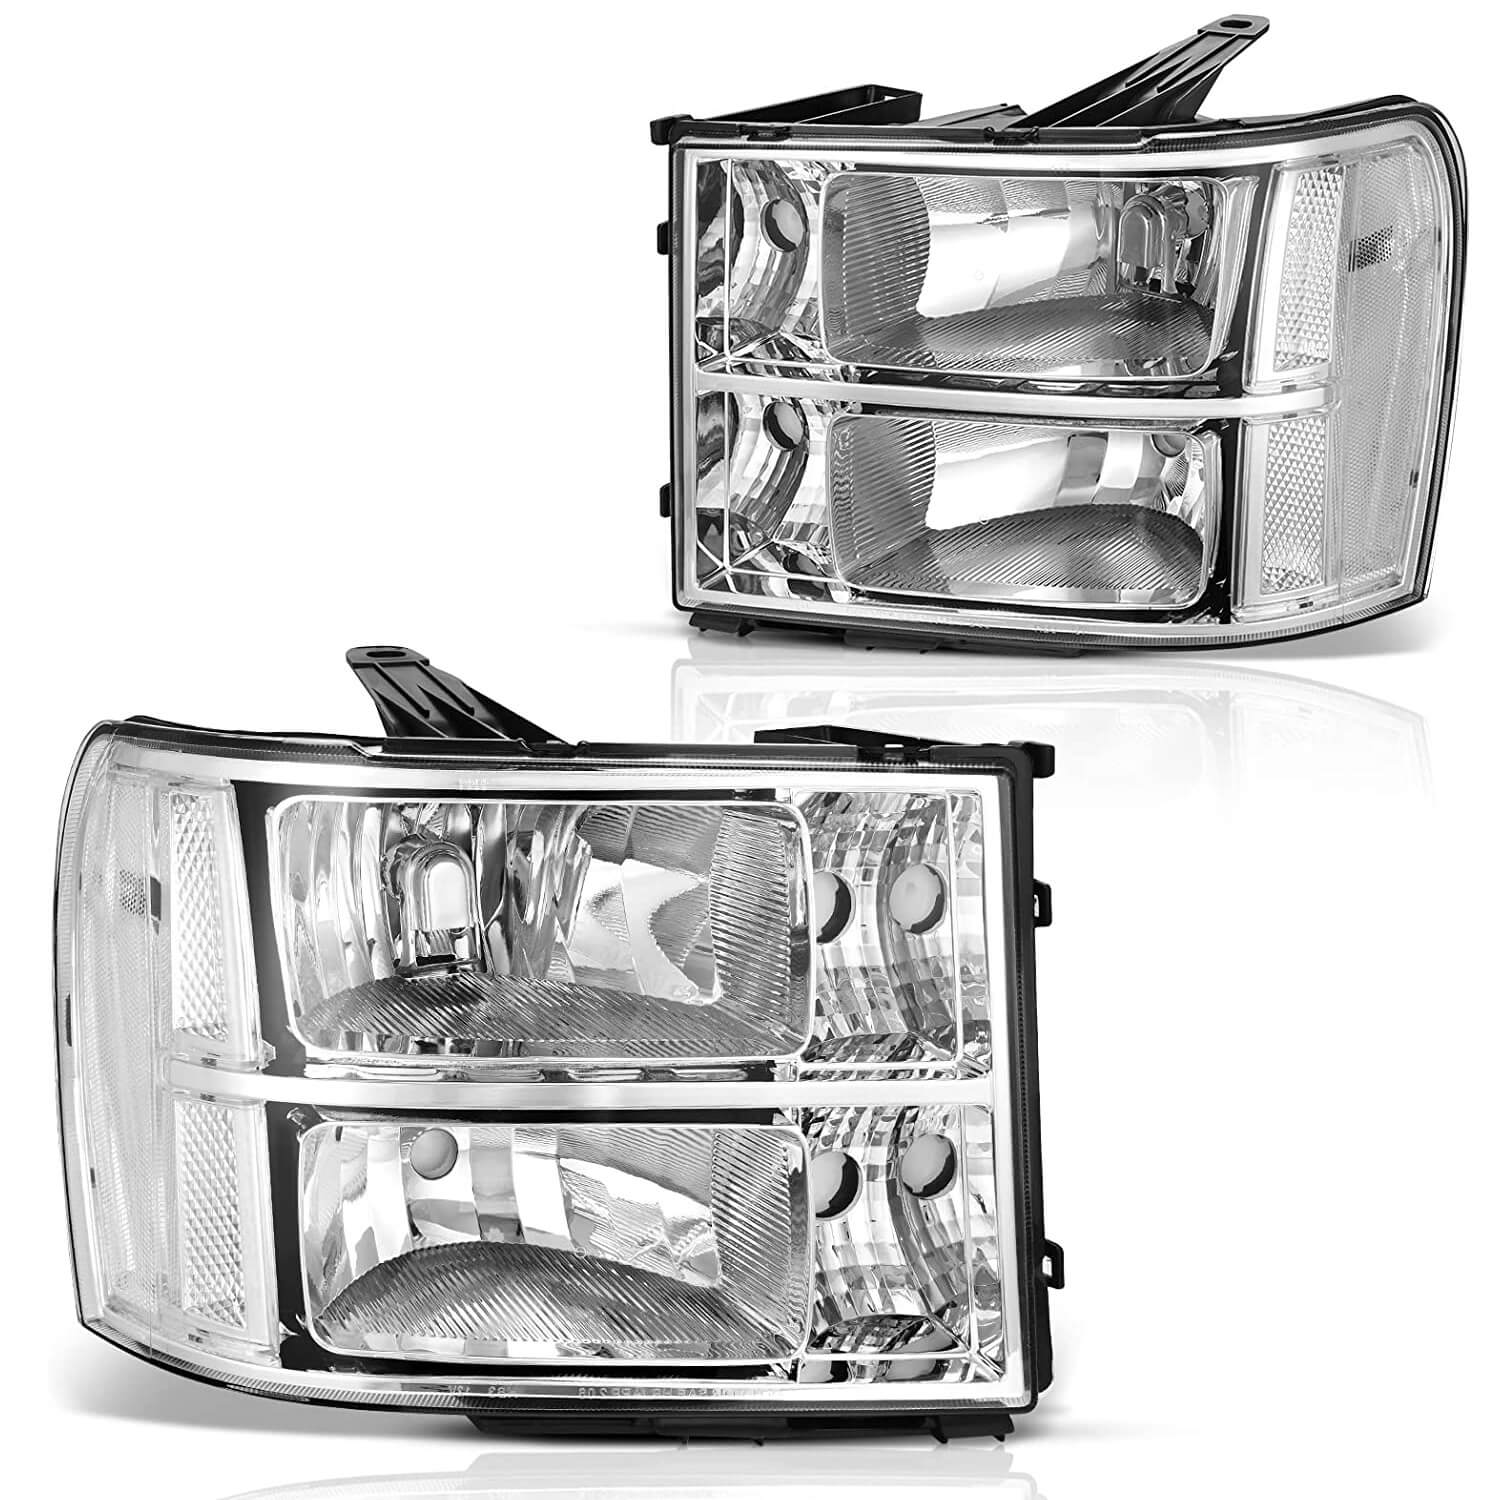 2007-2013 GMC Sierra 1500 LED Headlights for Headlight Replacement